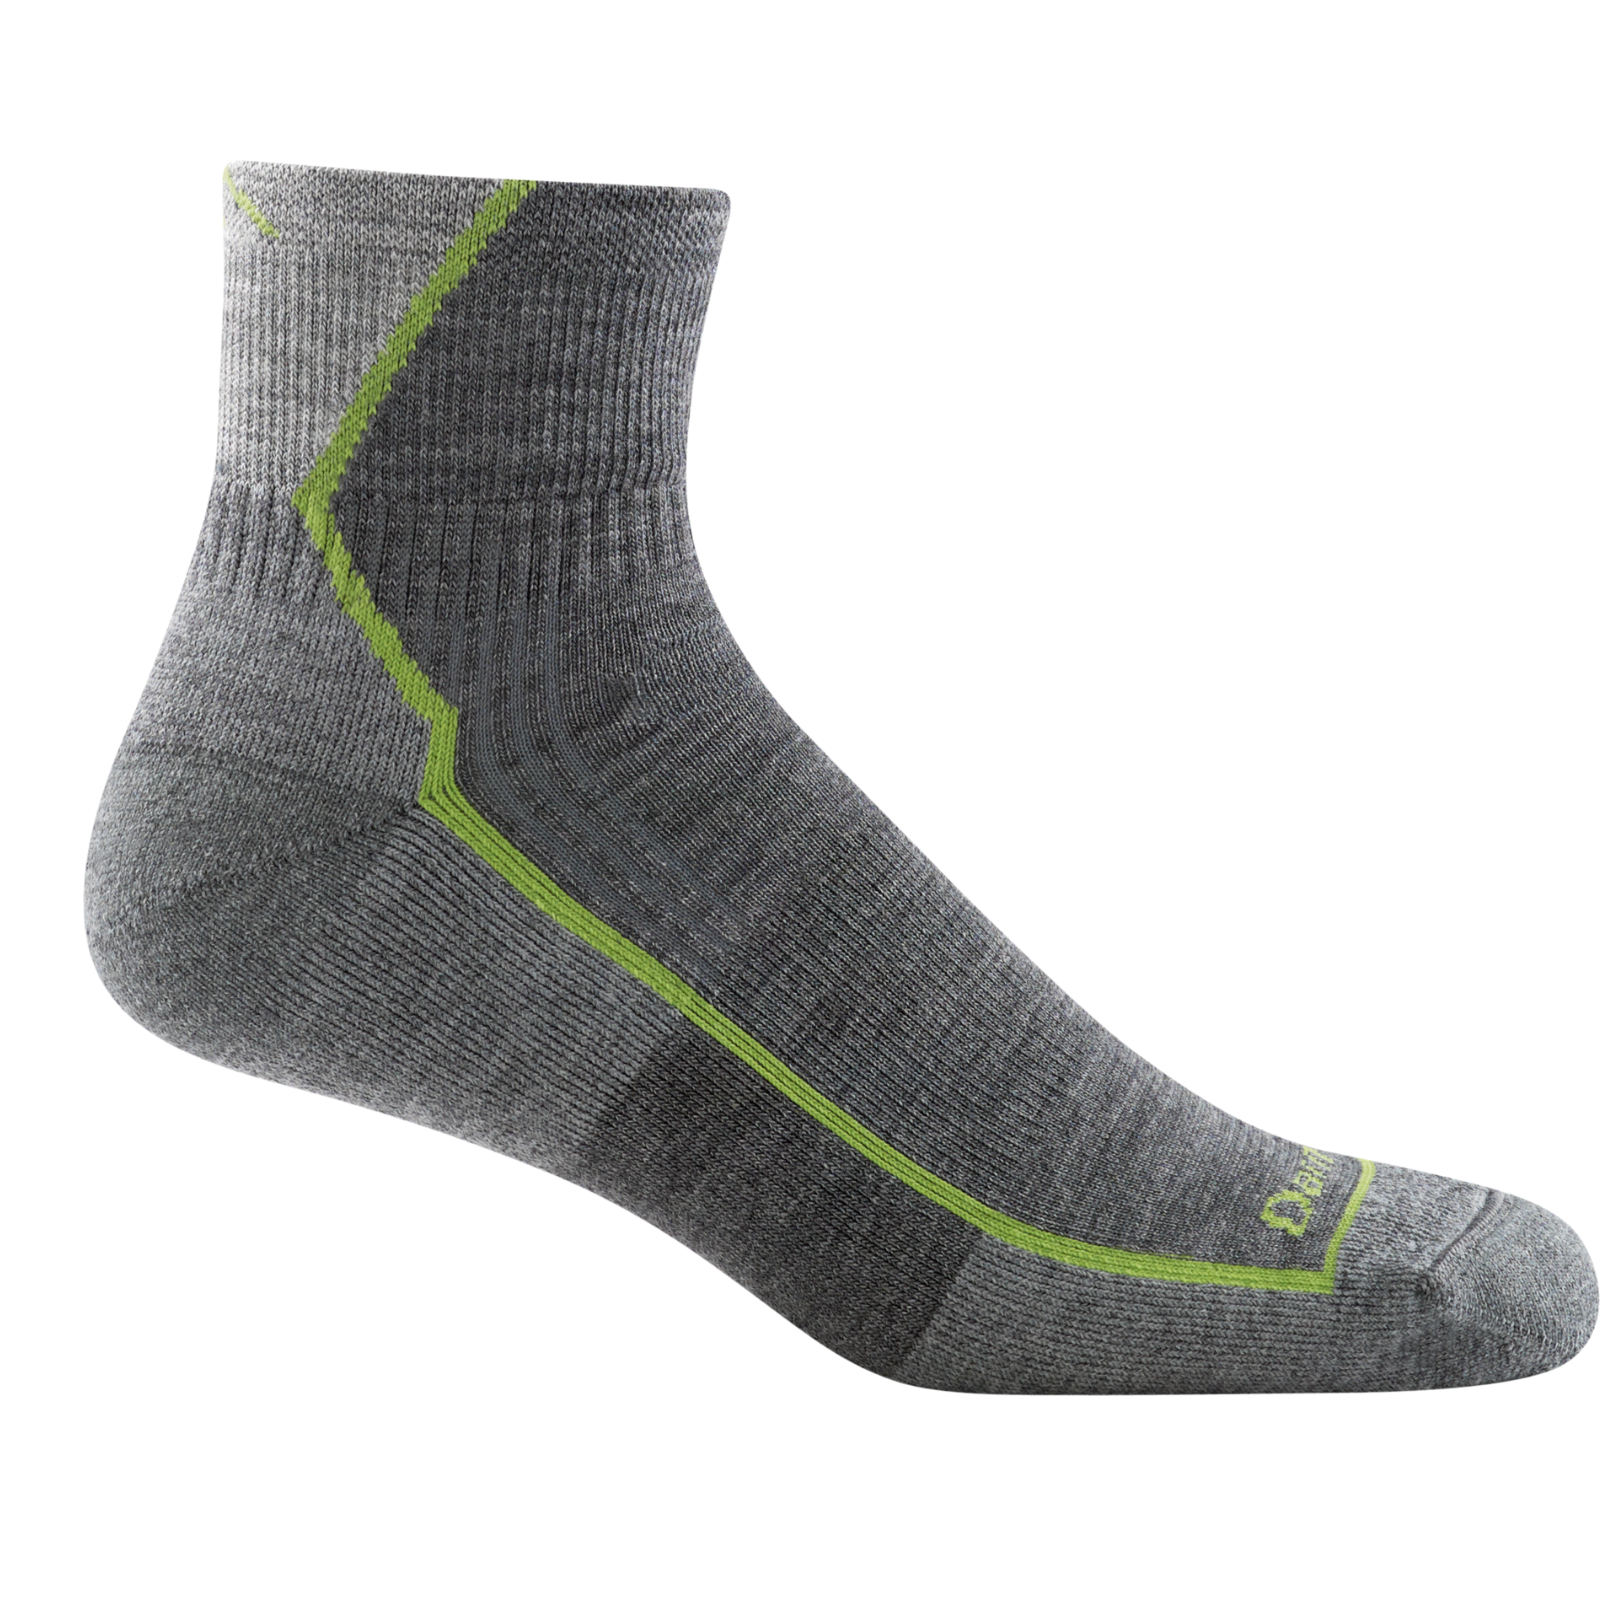 Keep your feet happy with world famous Darn Tough socks